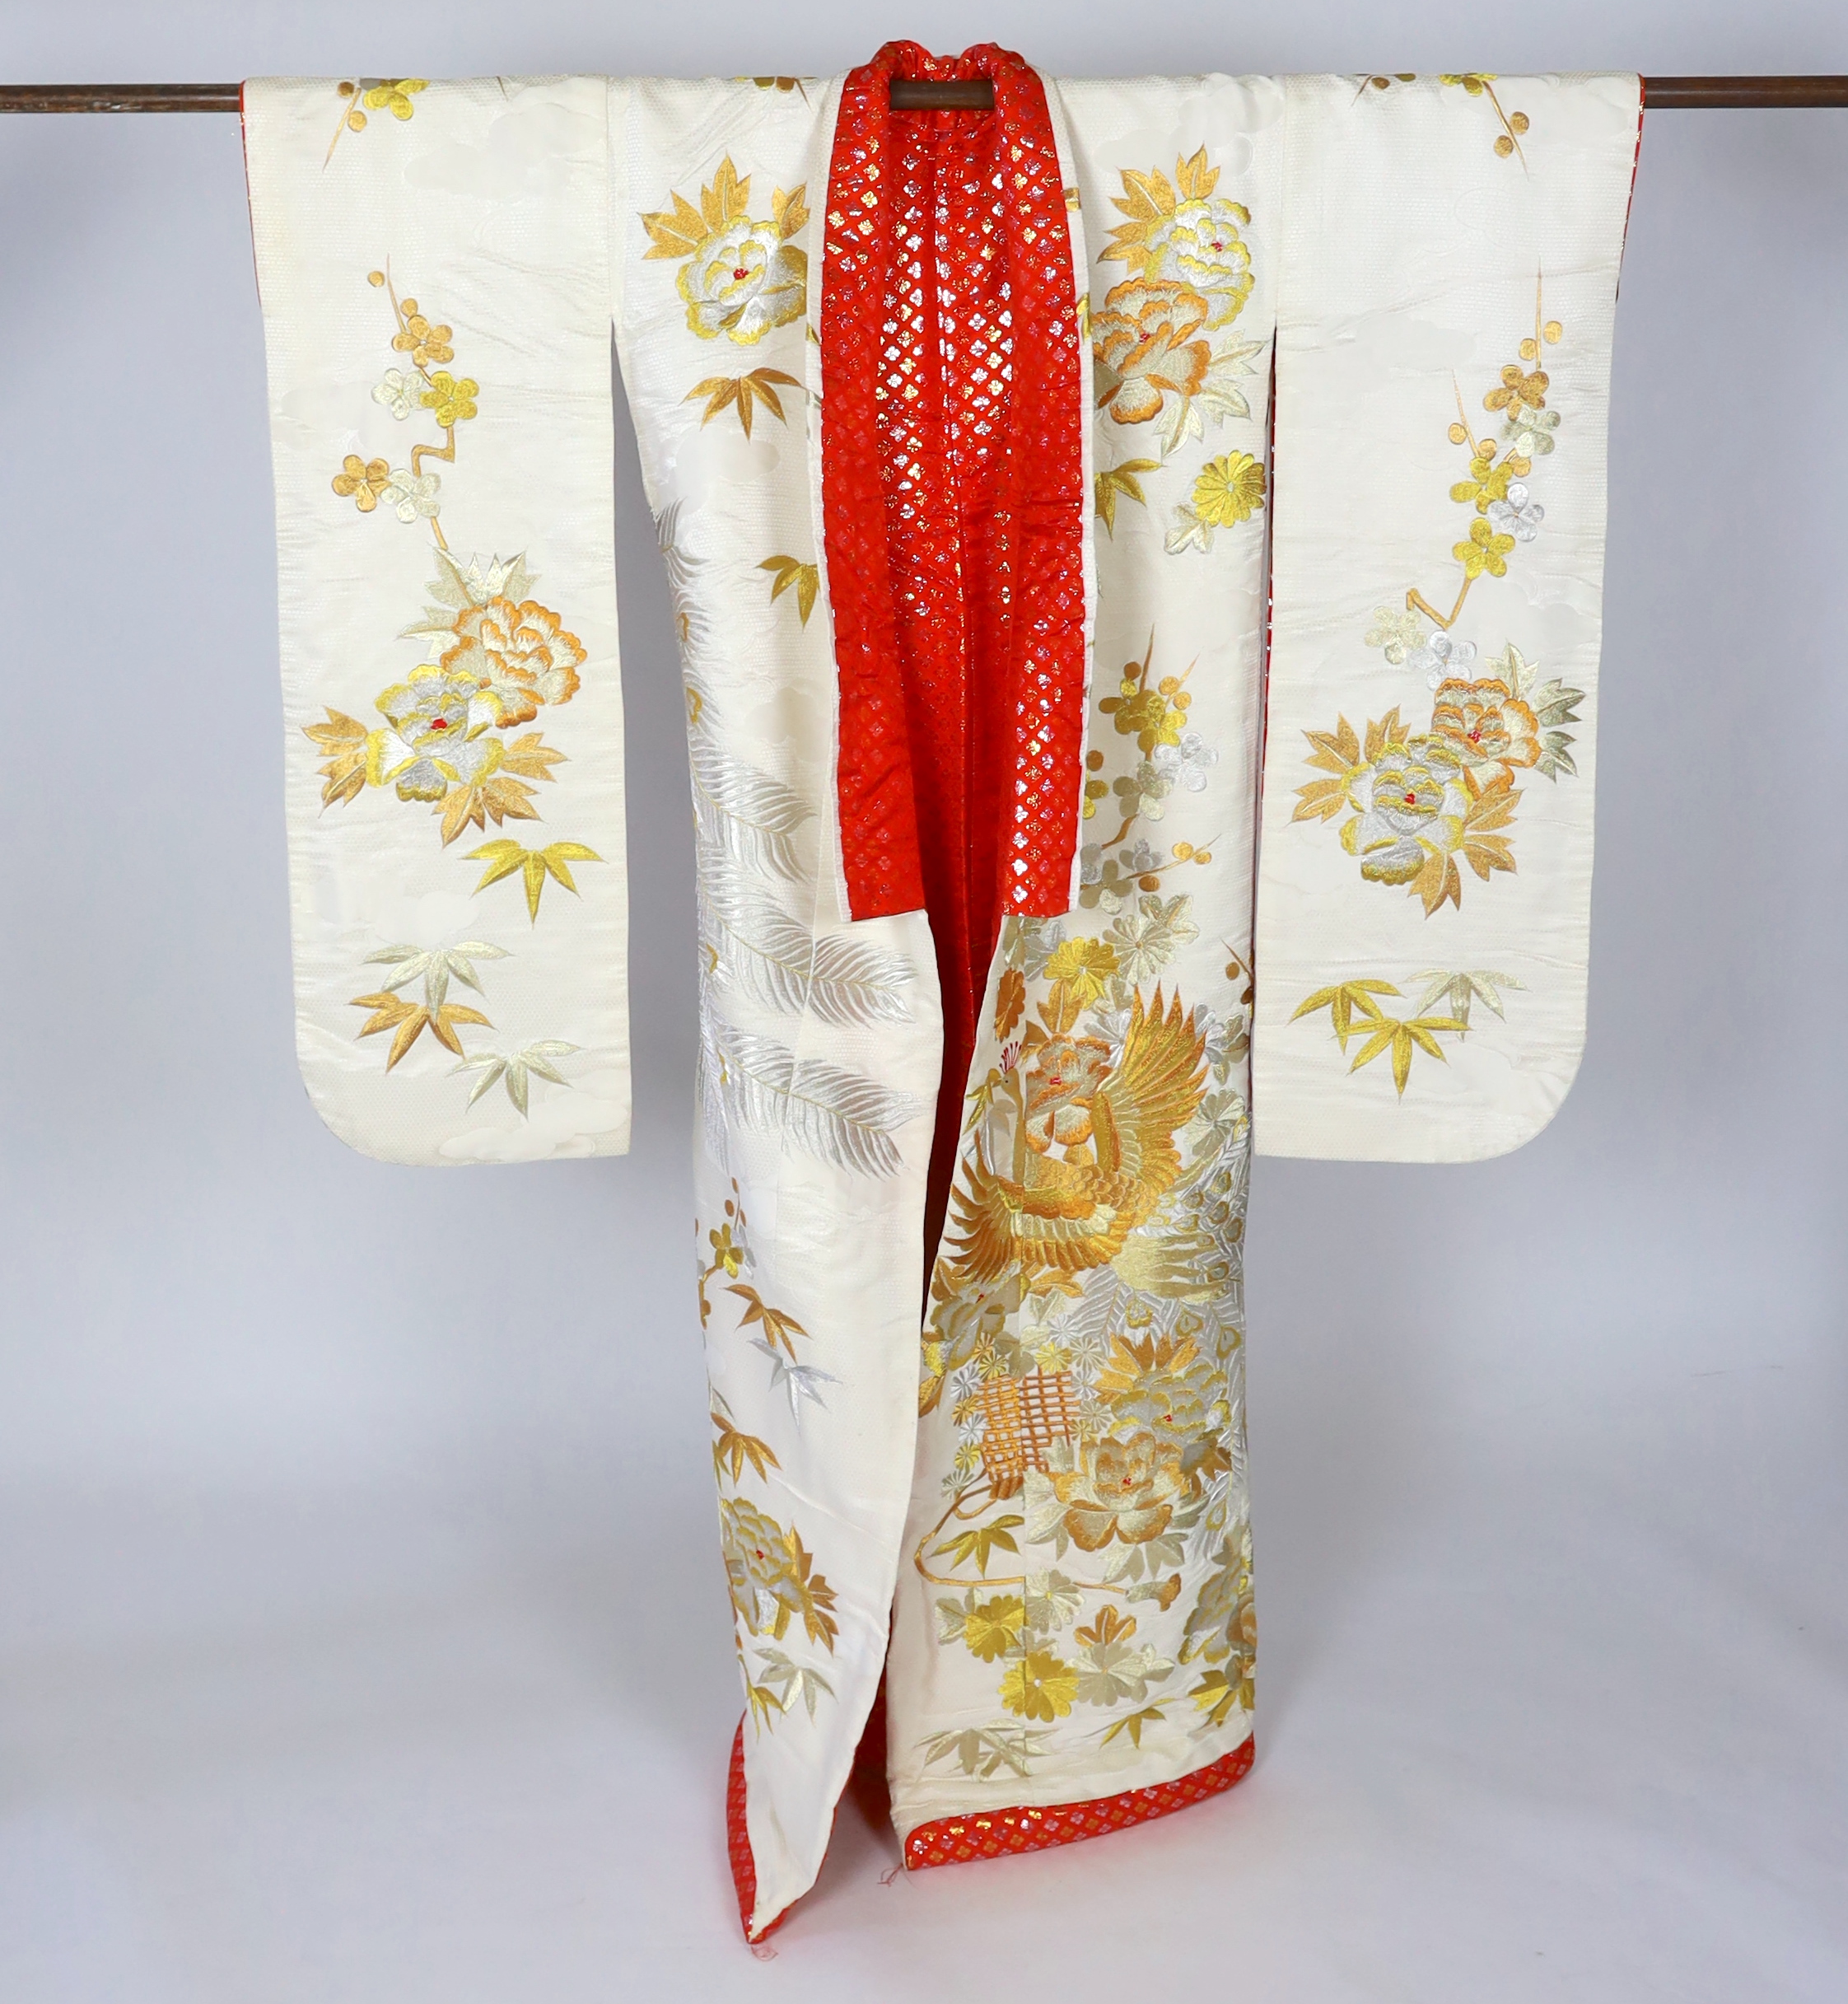 A 1960s-70s vintage Japanese embroidered wedding kimono, embroidered with pewter, bronze, silver and gold coloured metallic threads, into a large decorative design of peacocks with fanned tail feathers and trailing flowe